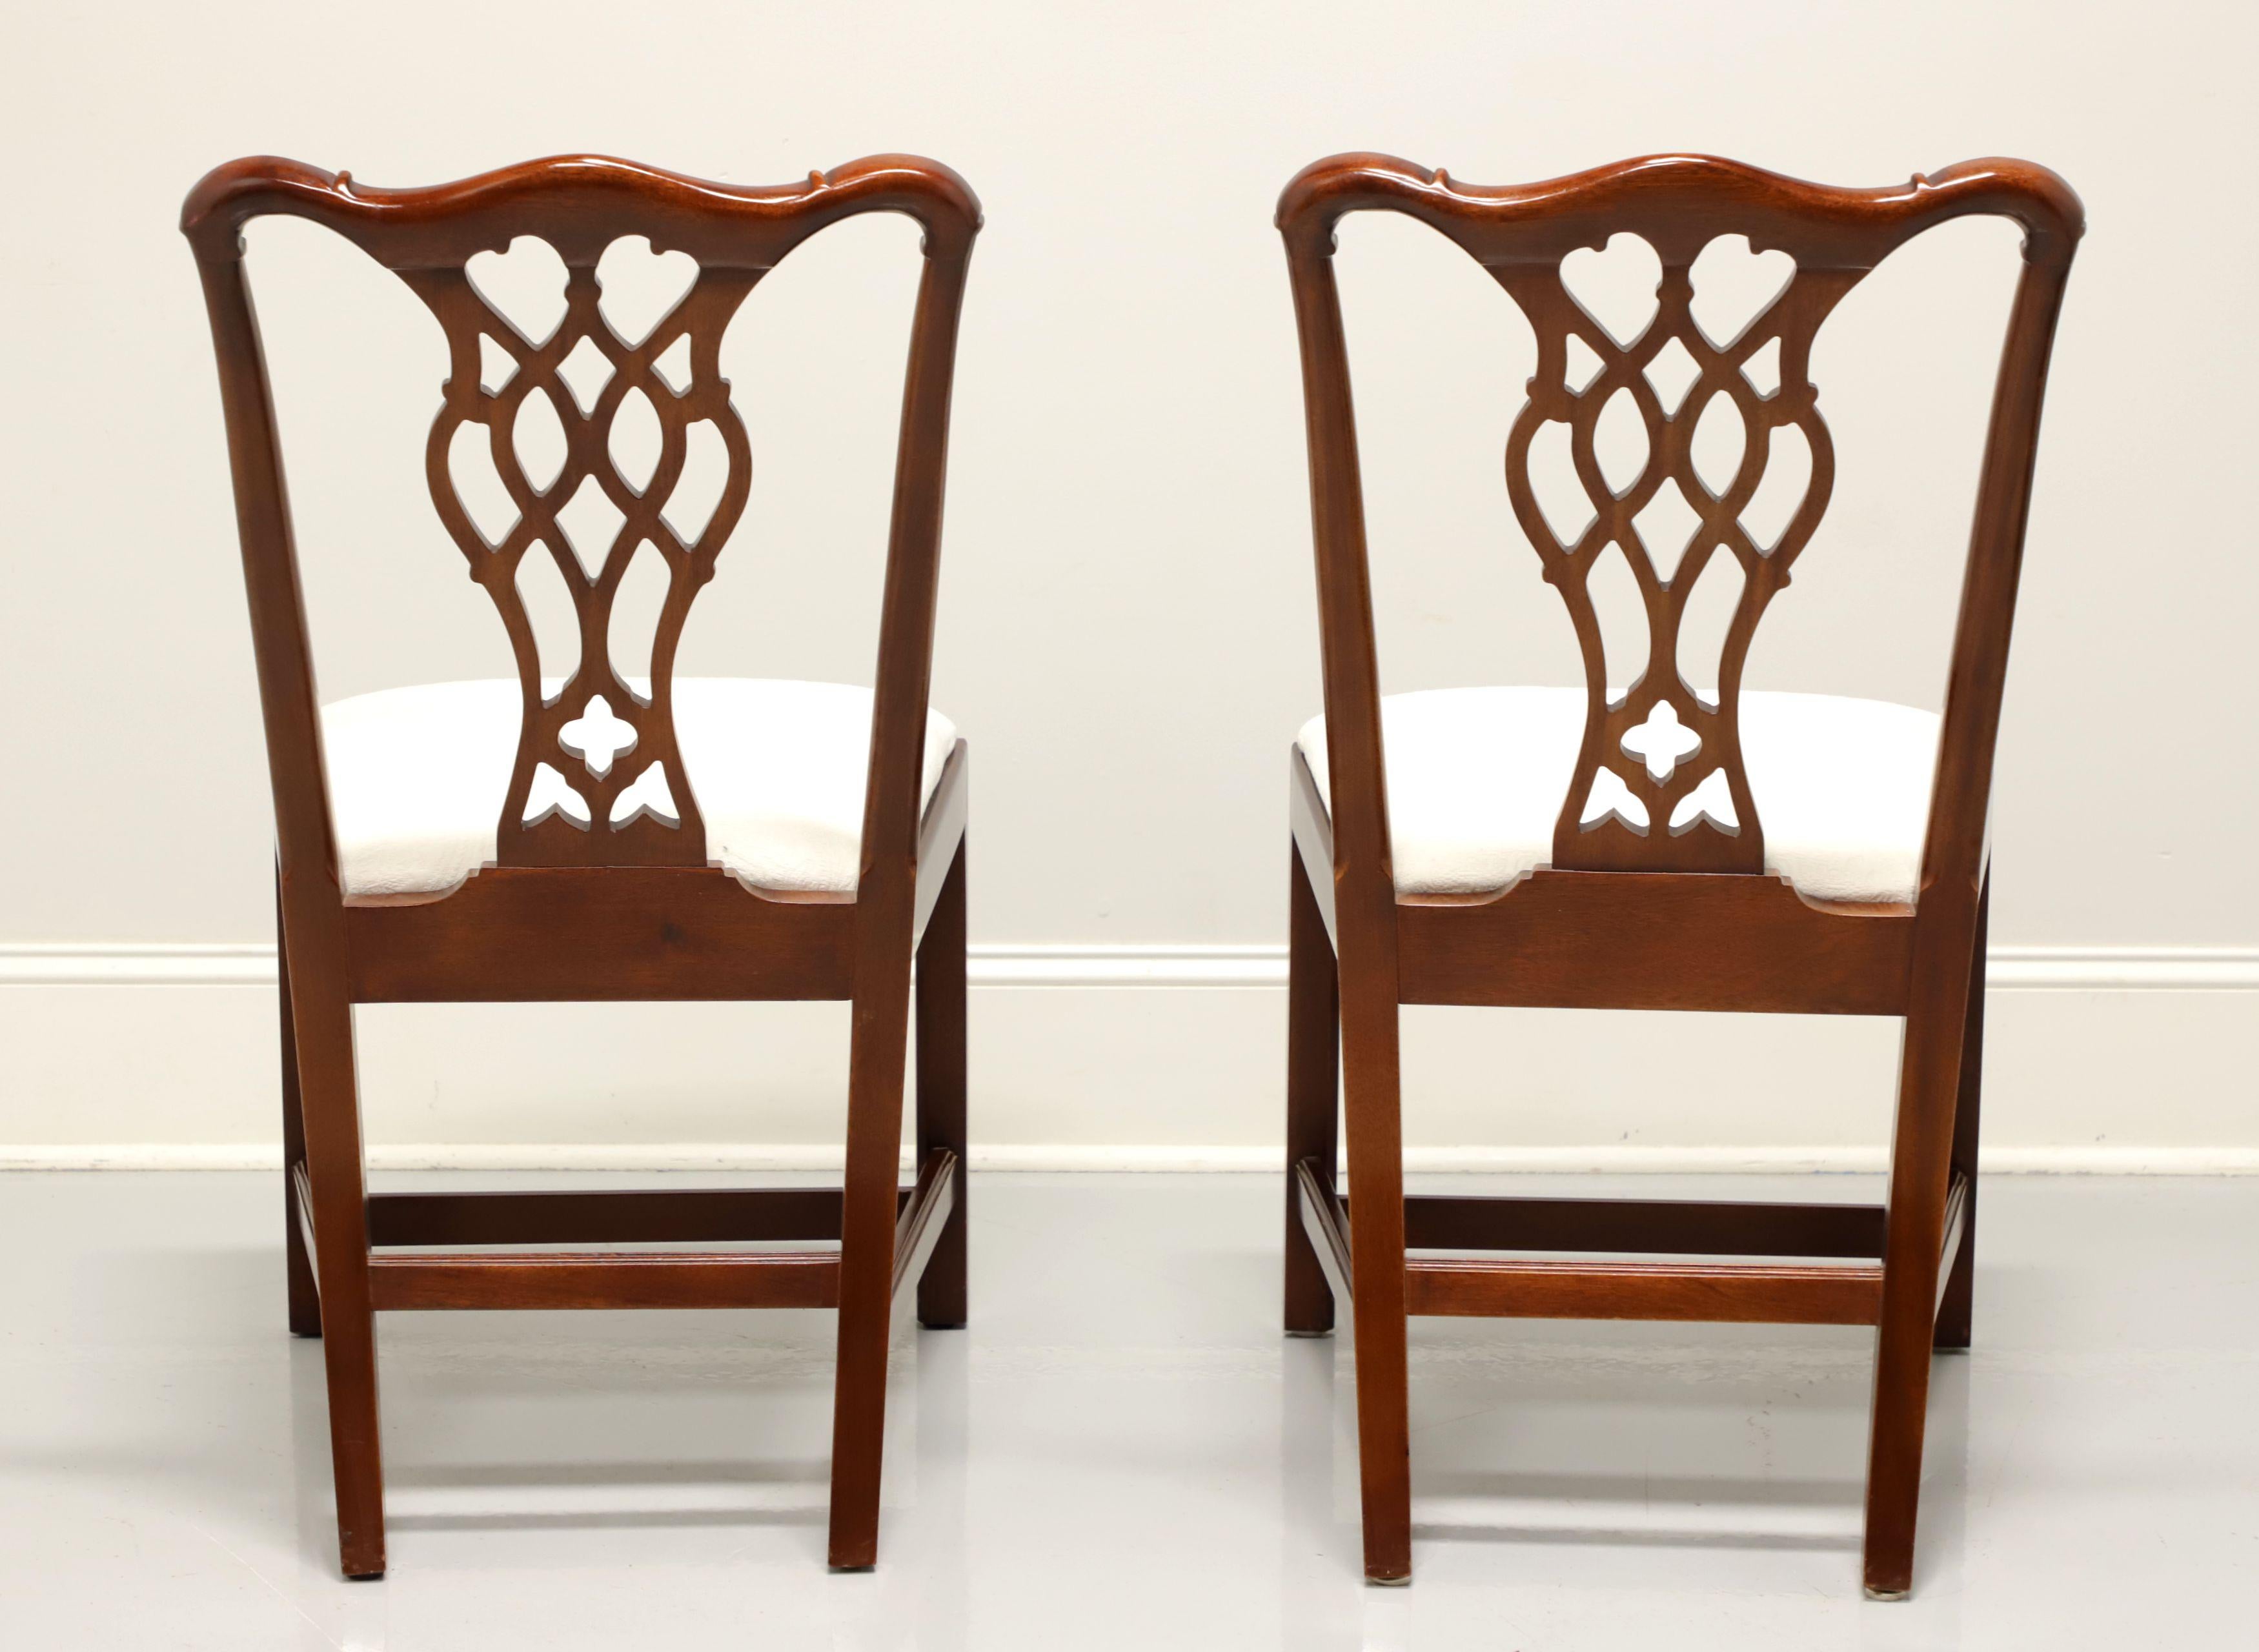 Fabric COUNCILL Mahogany Chippendale Style Straight Leg Dining Side Chairs - Pair